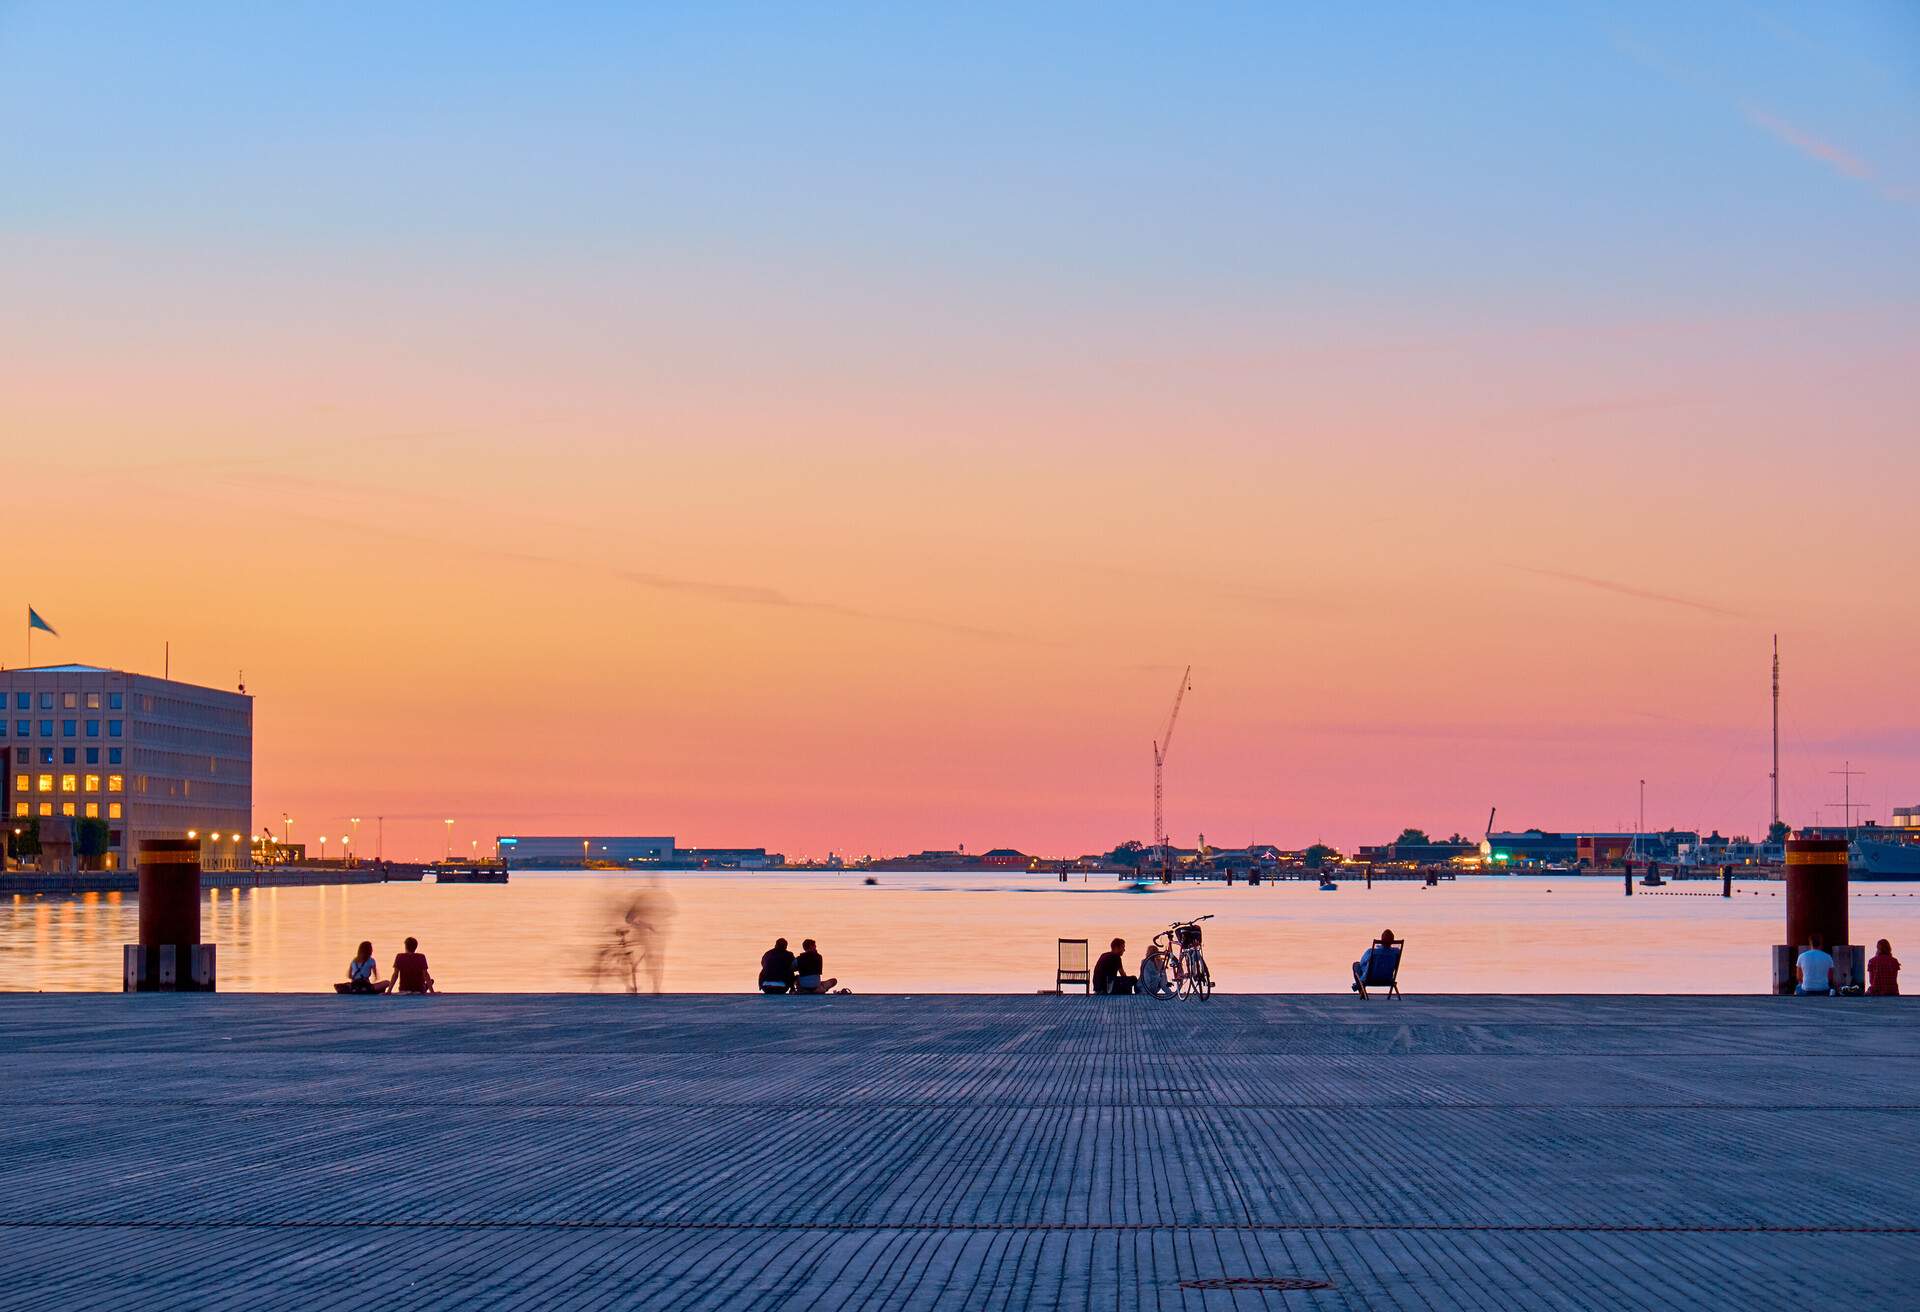 Cityscape at night. People on the beach enjoy the sunset in the center of Copenhagen.